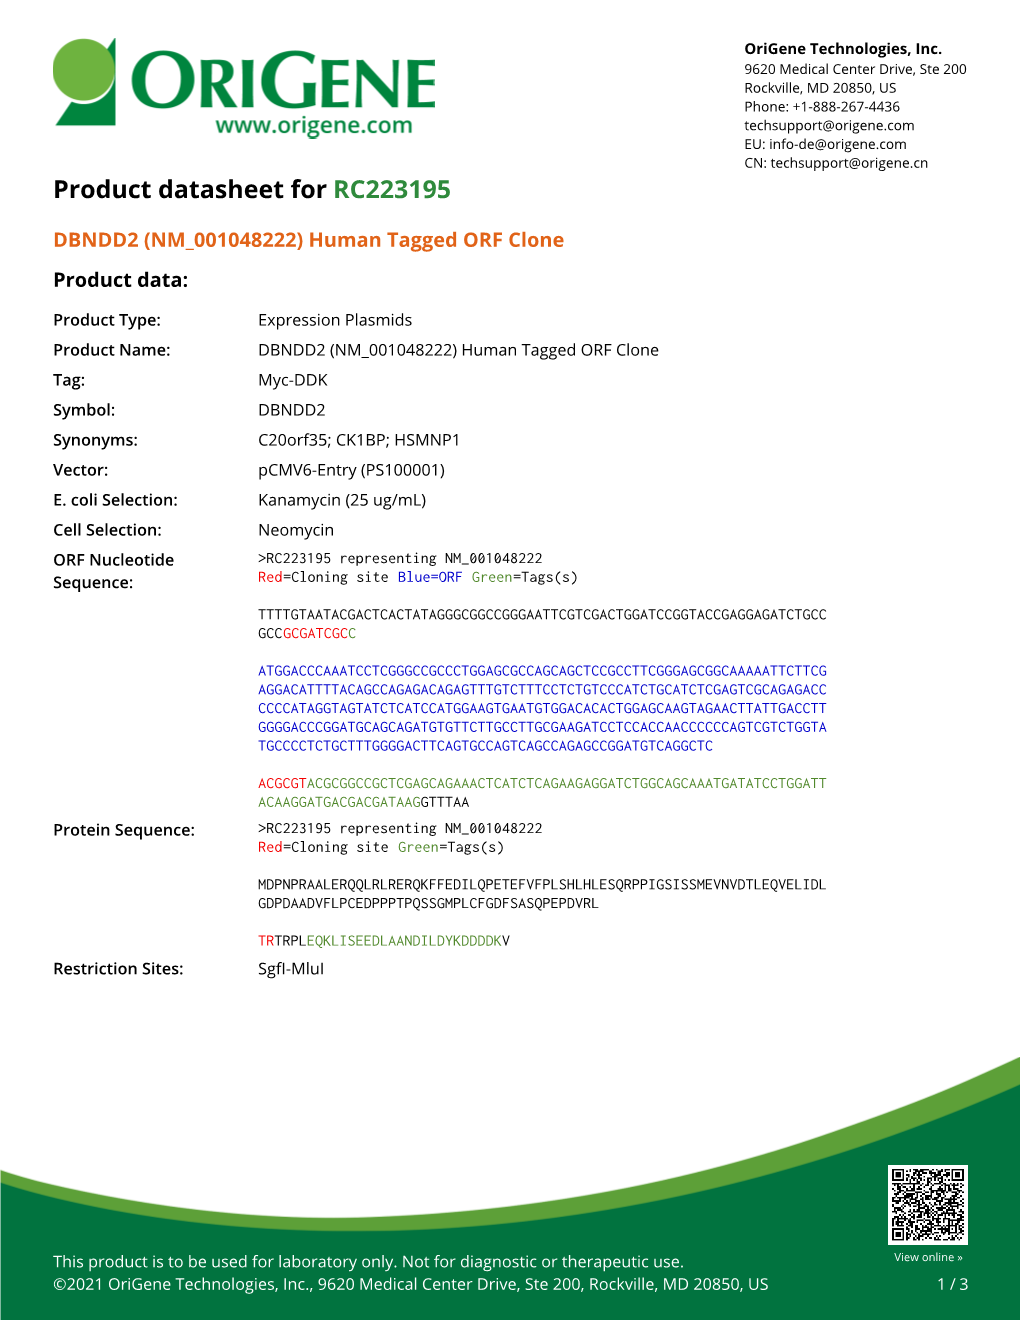 DBNDD2 (NM 001048222) Human Tagged ORF Clone Product Data